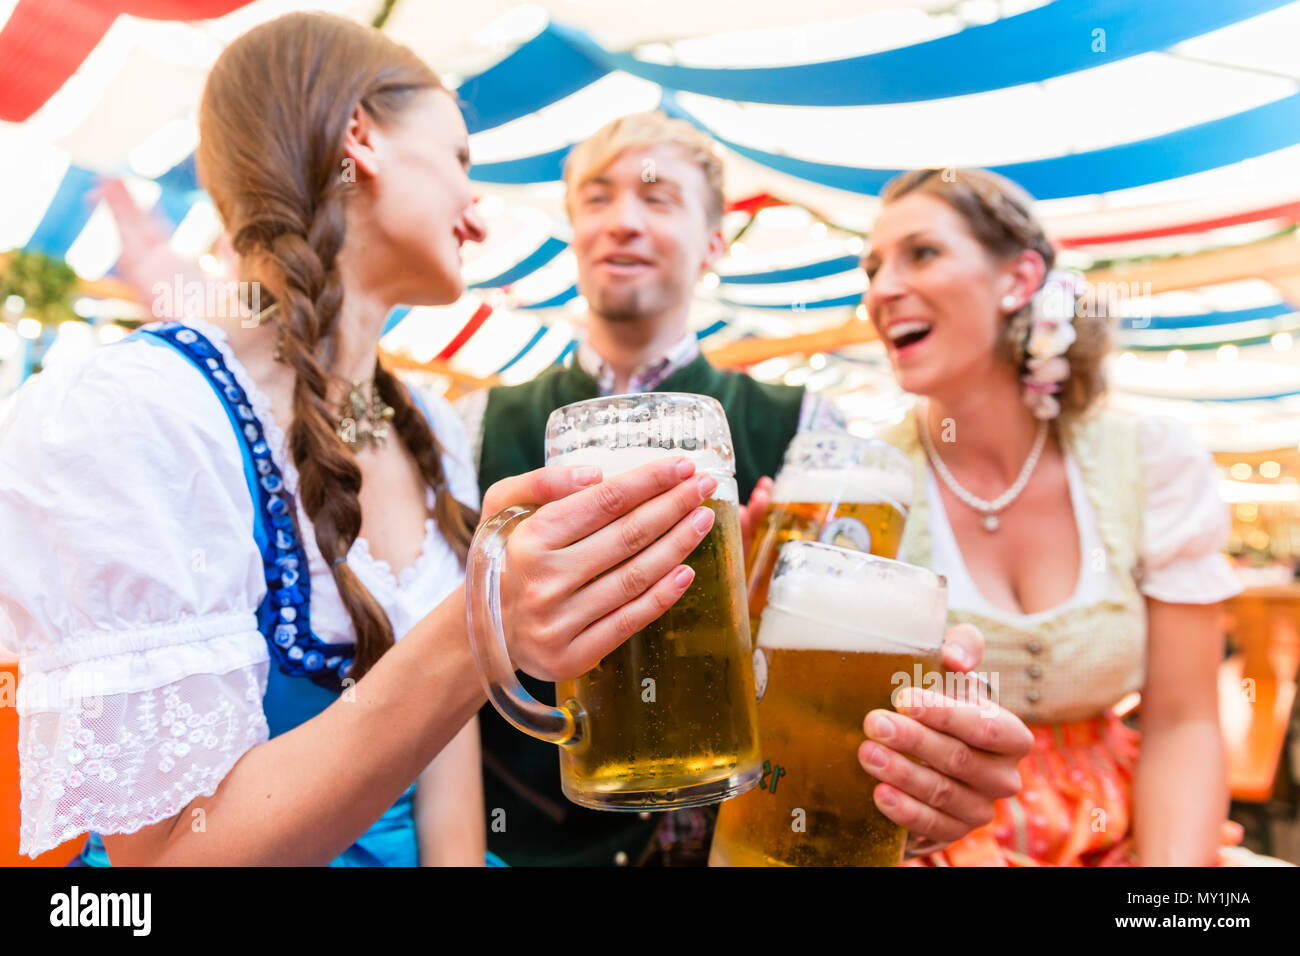 Friends with beer glasses at Bavarian beer tent Stock Photo